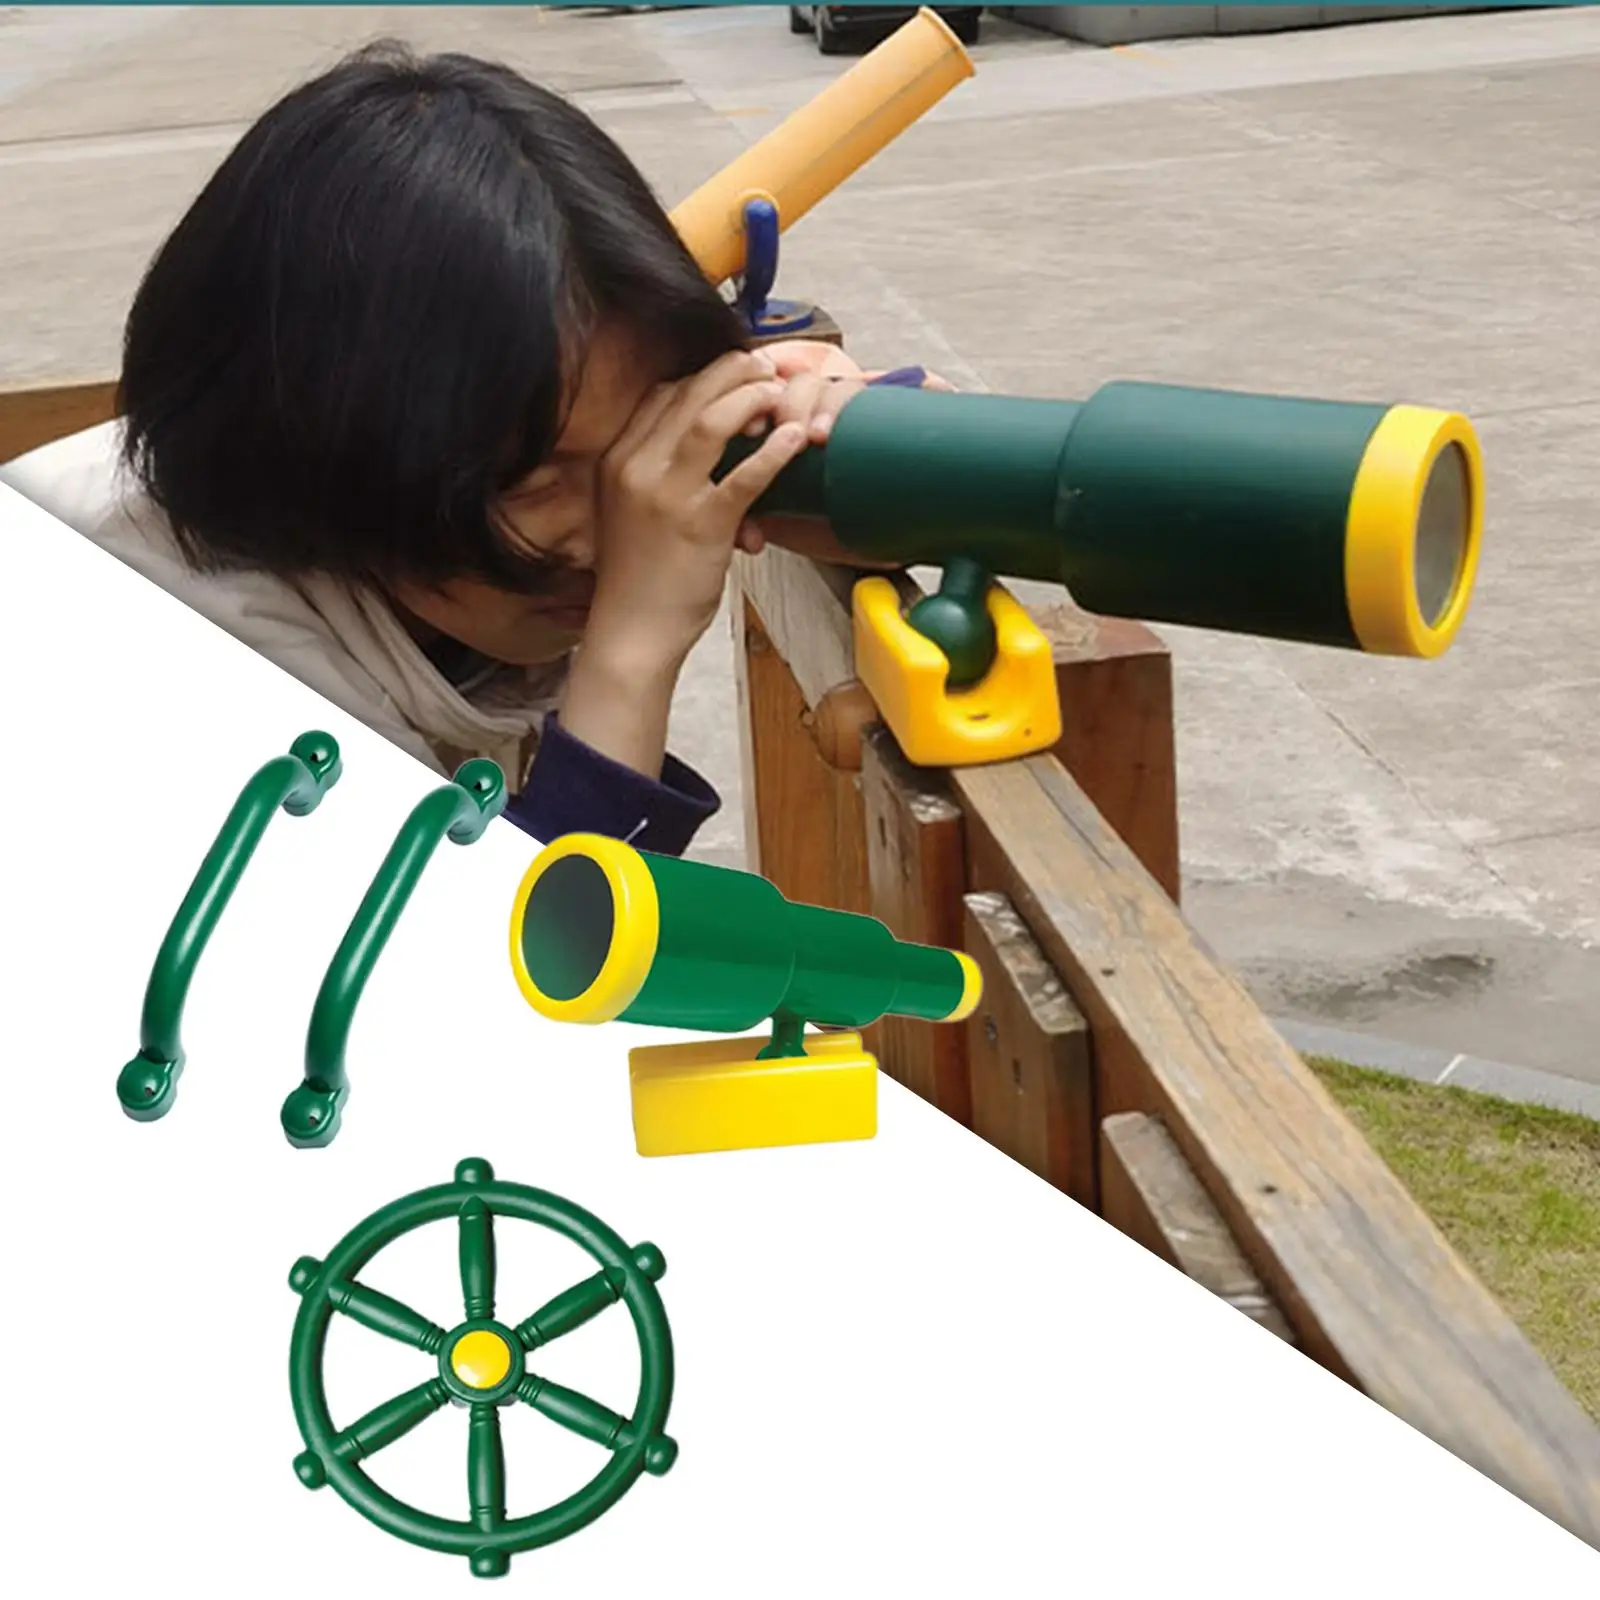 4x Playground Equipment Set Active Outdoor Play Kids Pirate Telescope Steering Wheel & Safety Handle Bars for Gym Boys & Girls